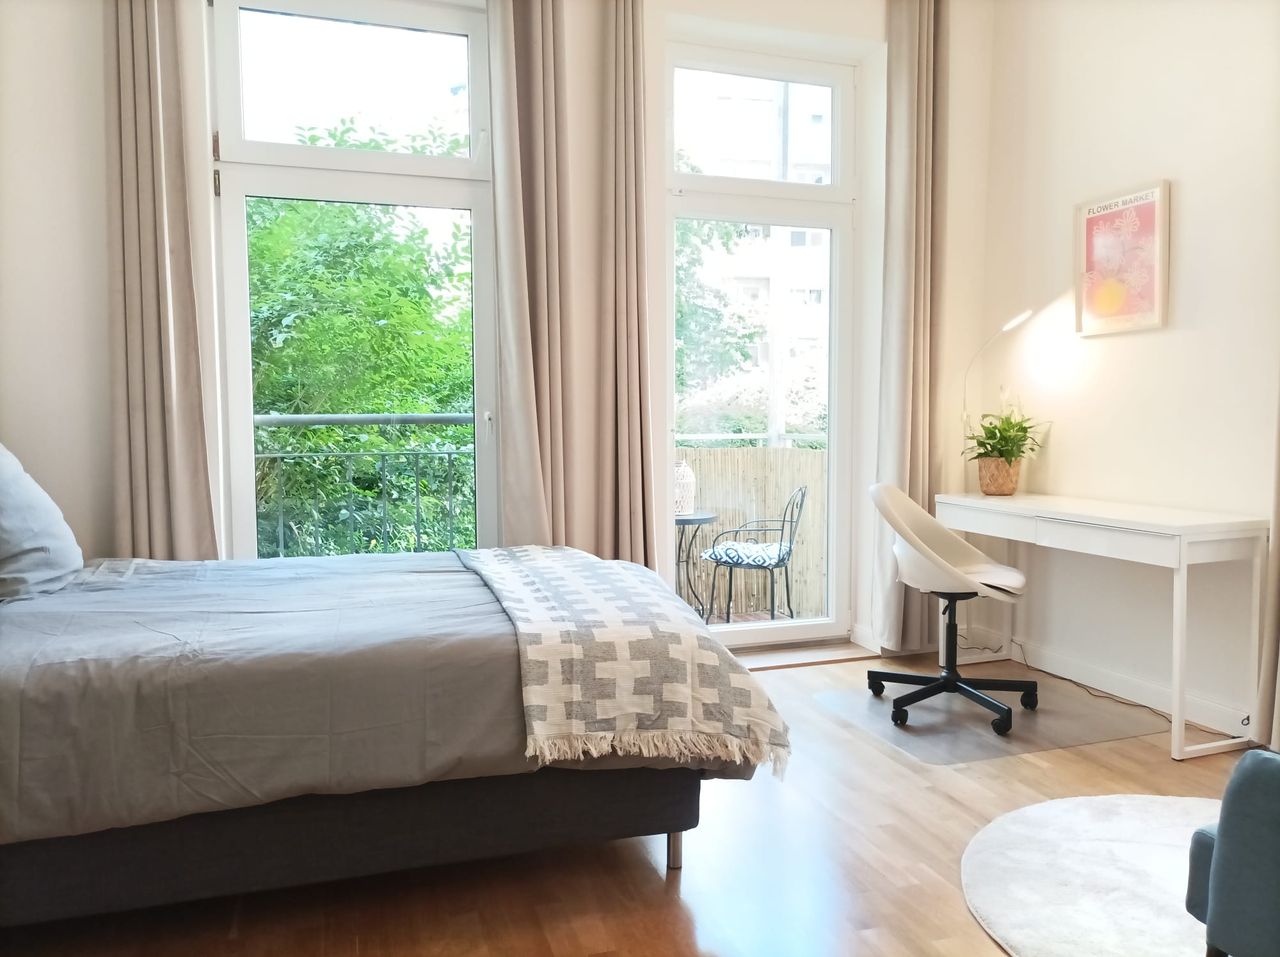 The perfect WG! Beautiful 3 room, newly renovated and furnished flat in a top location in Mitte